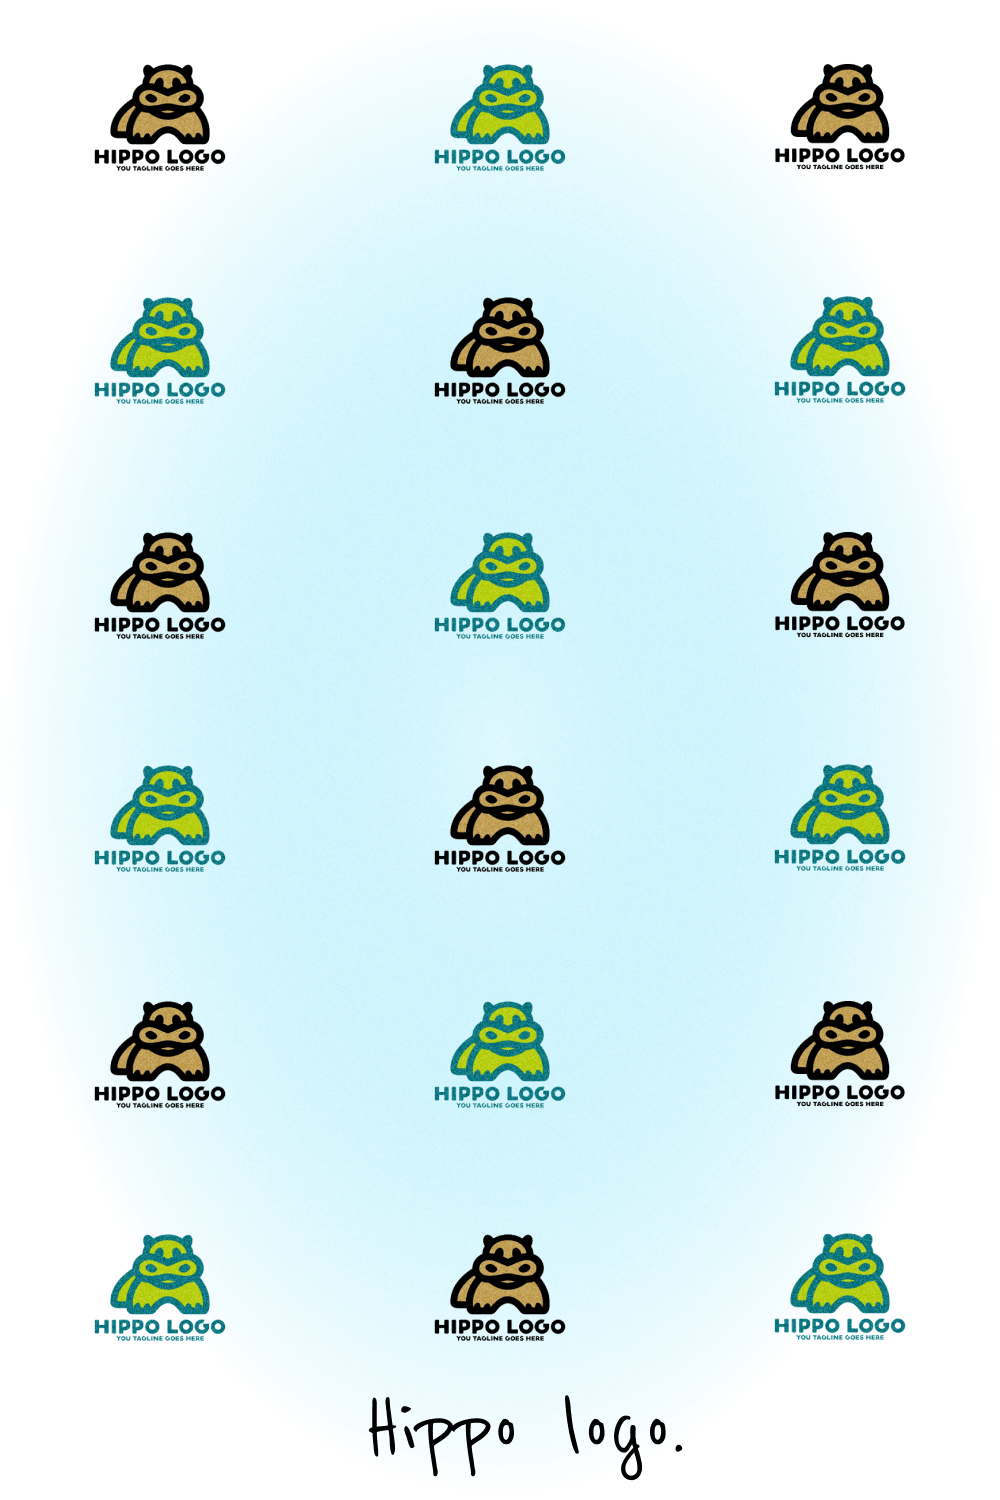 Hippos on the logo of different species.